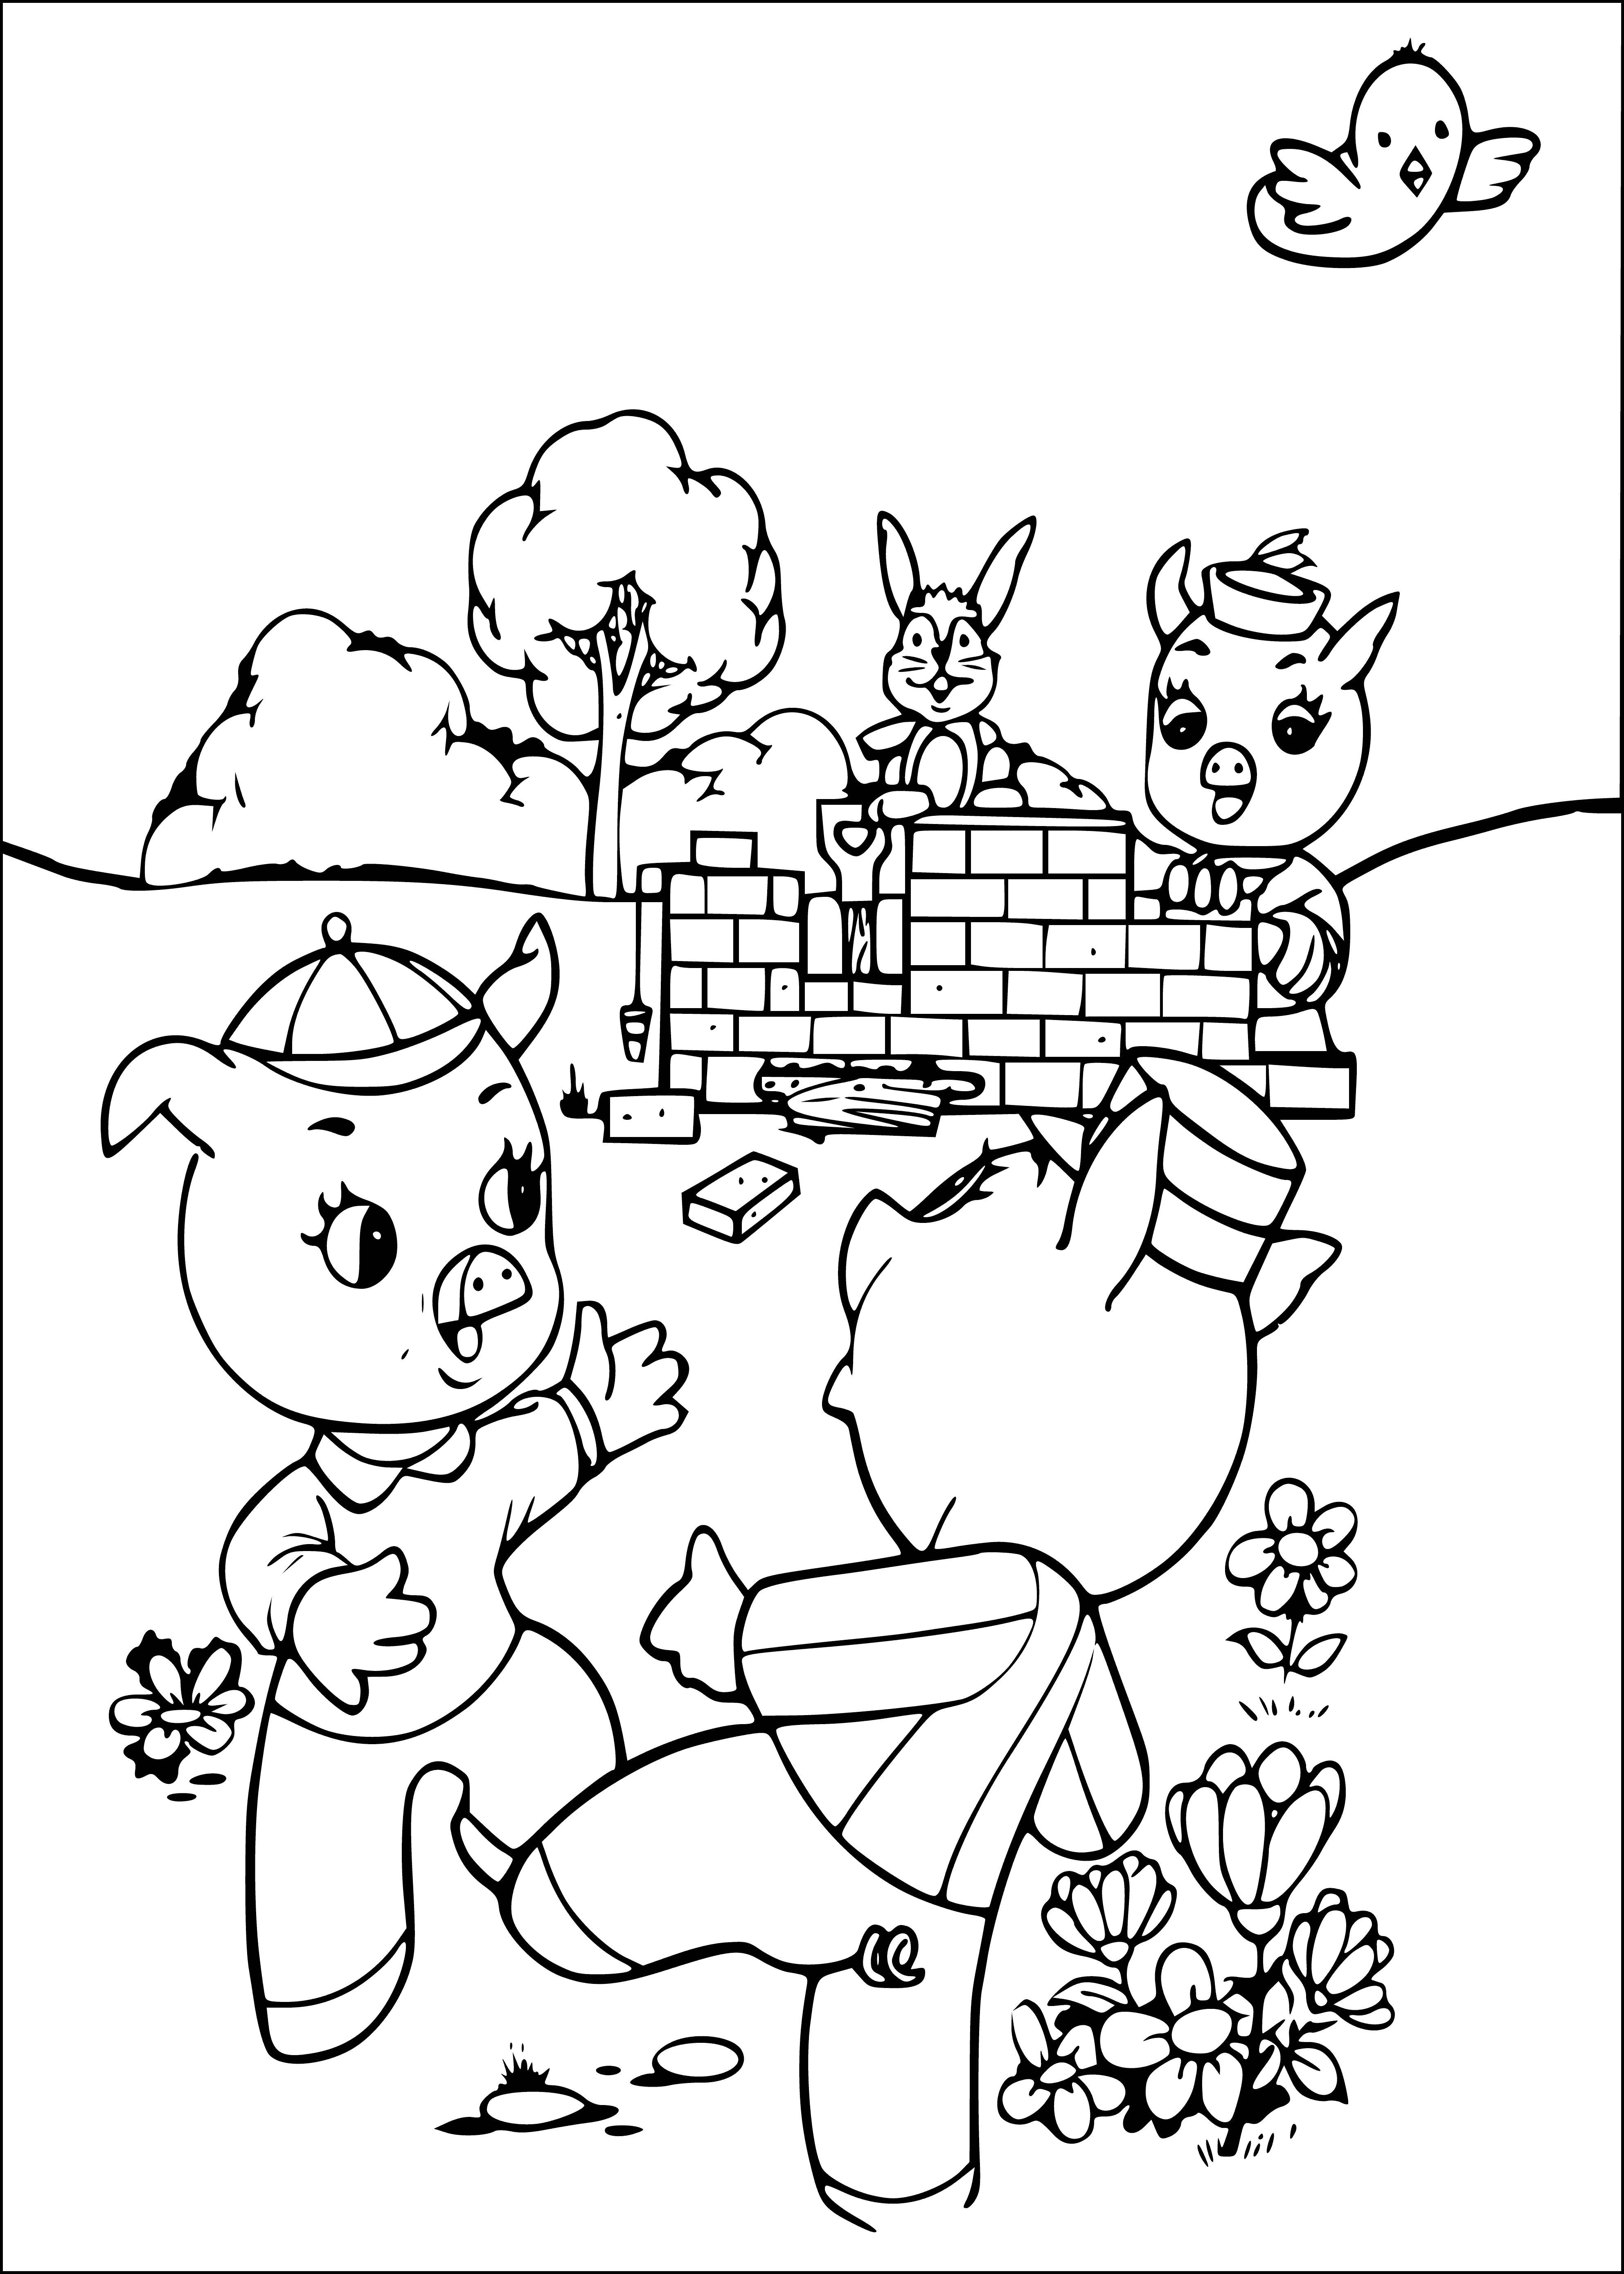 Look, he's afraid of the wolf! coloring page